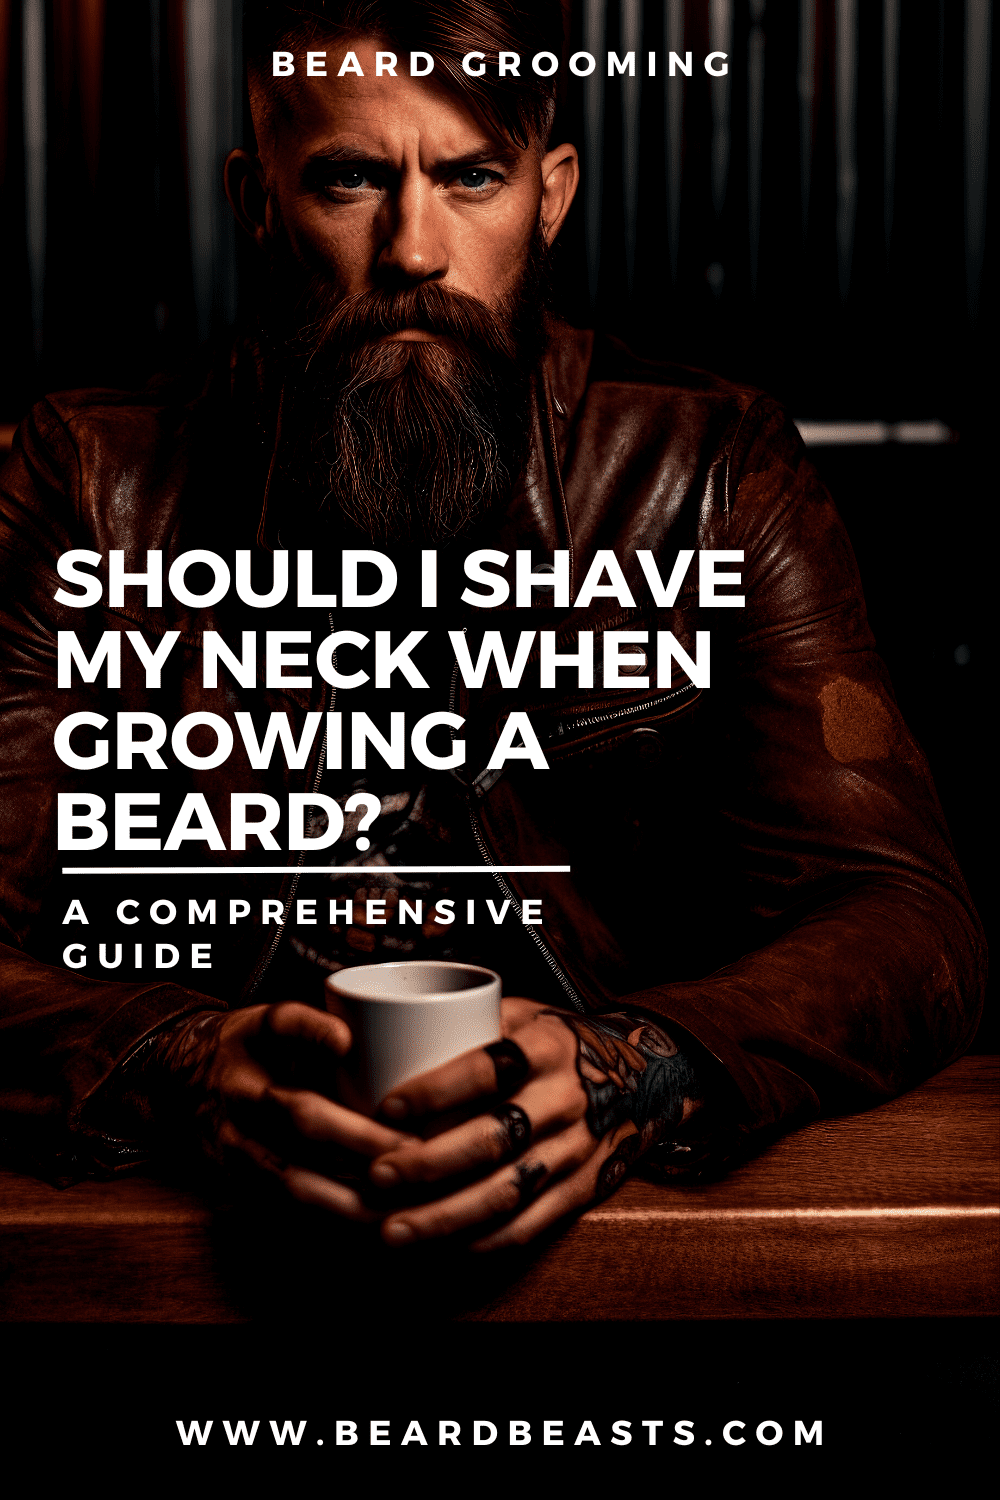 Should I Shave My Neck When Growing a Beard? Pinterest Pin